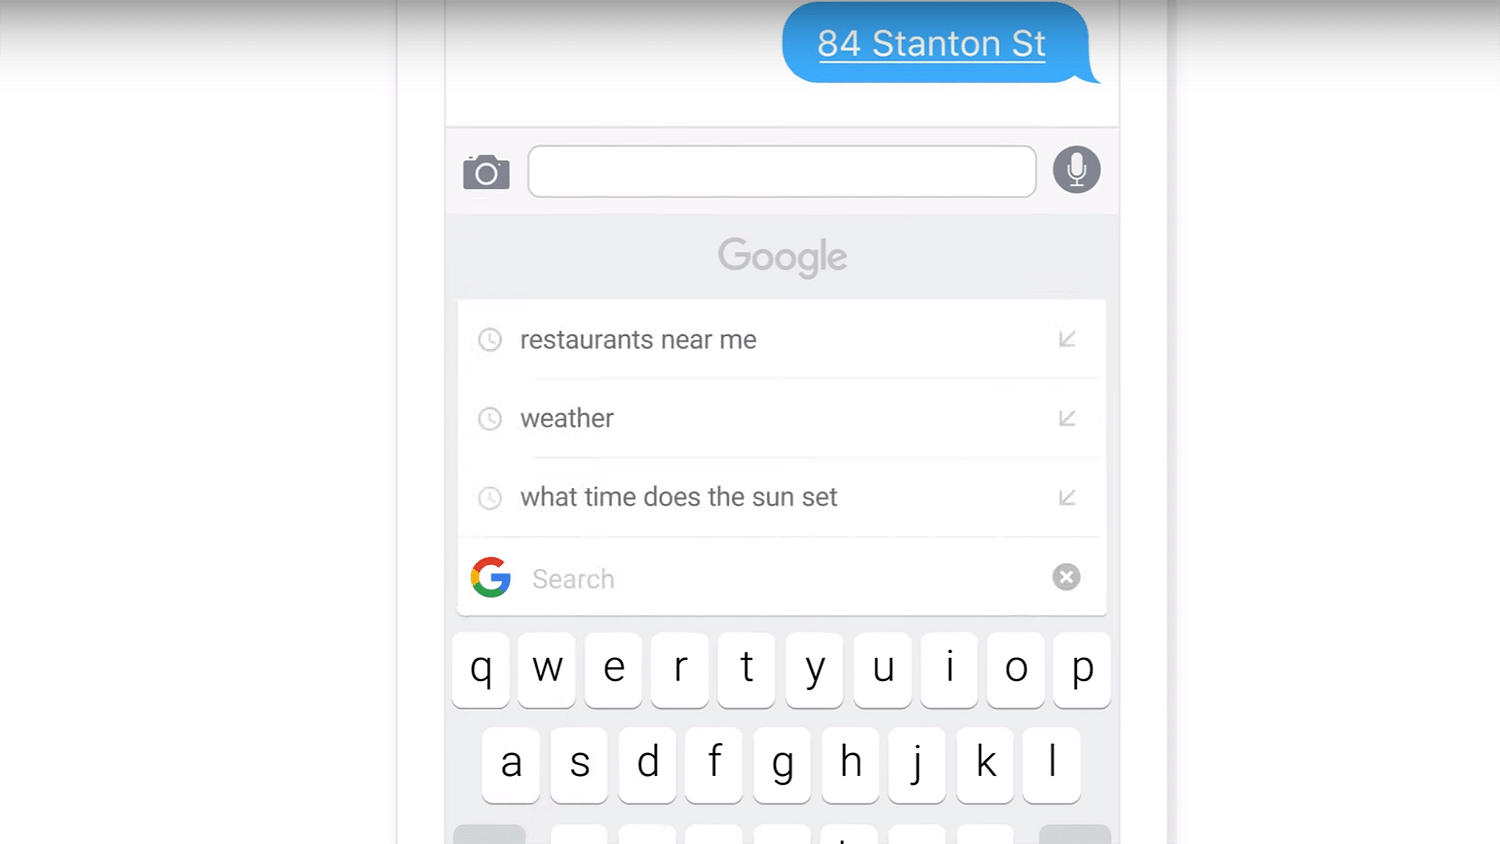 Google keyboard on iOS has added Morse code input support.